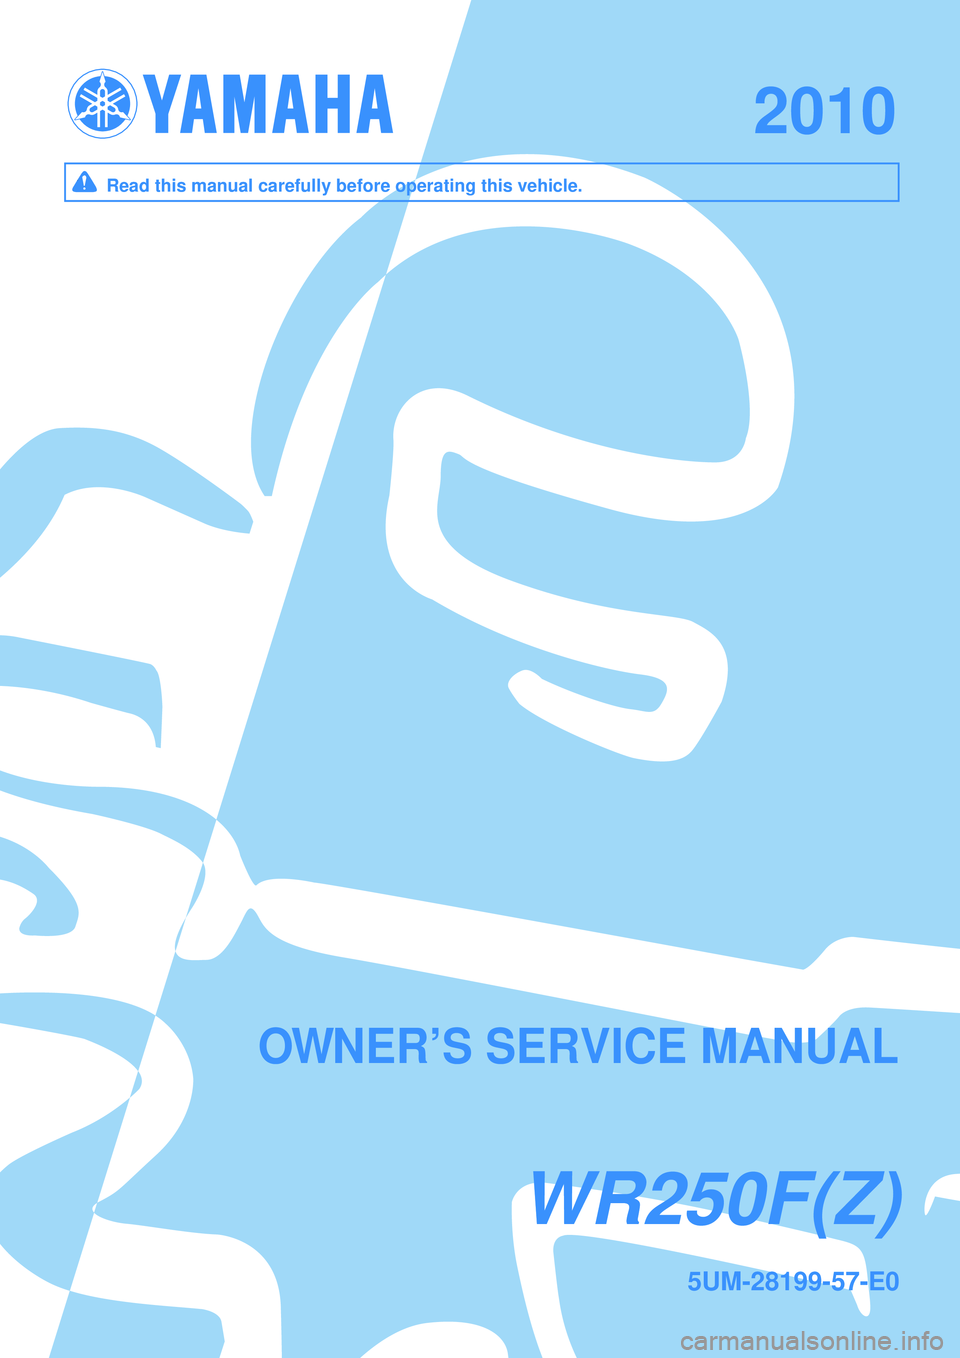 YAMAHA WR 250F 2010  Owners Manual WR250F(Z)WR250F(Z)
20102010
5UM-28199-57-E05UM-28199-57-E0
OWNER’S SERVICE MANUALOWNER’S SERVICE MANUAL
Read this manual carefully before operating this vehicle.Read this manual carefully before o